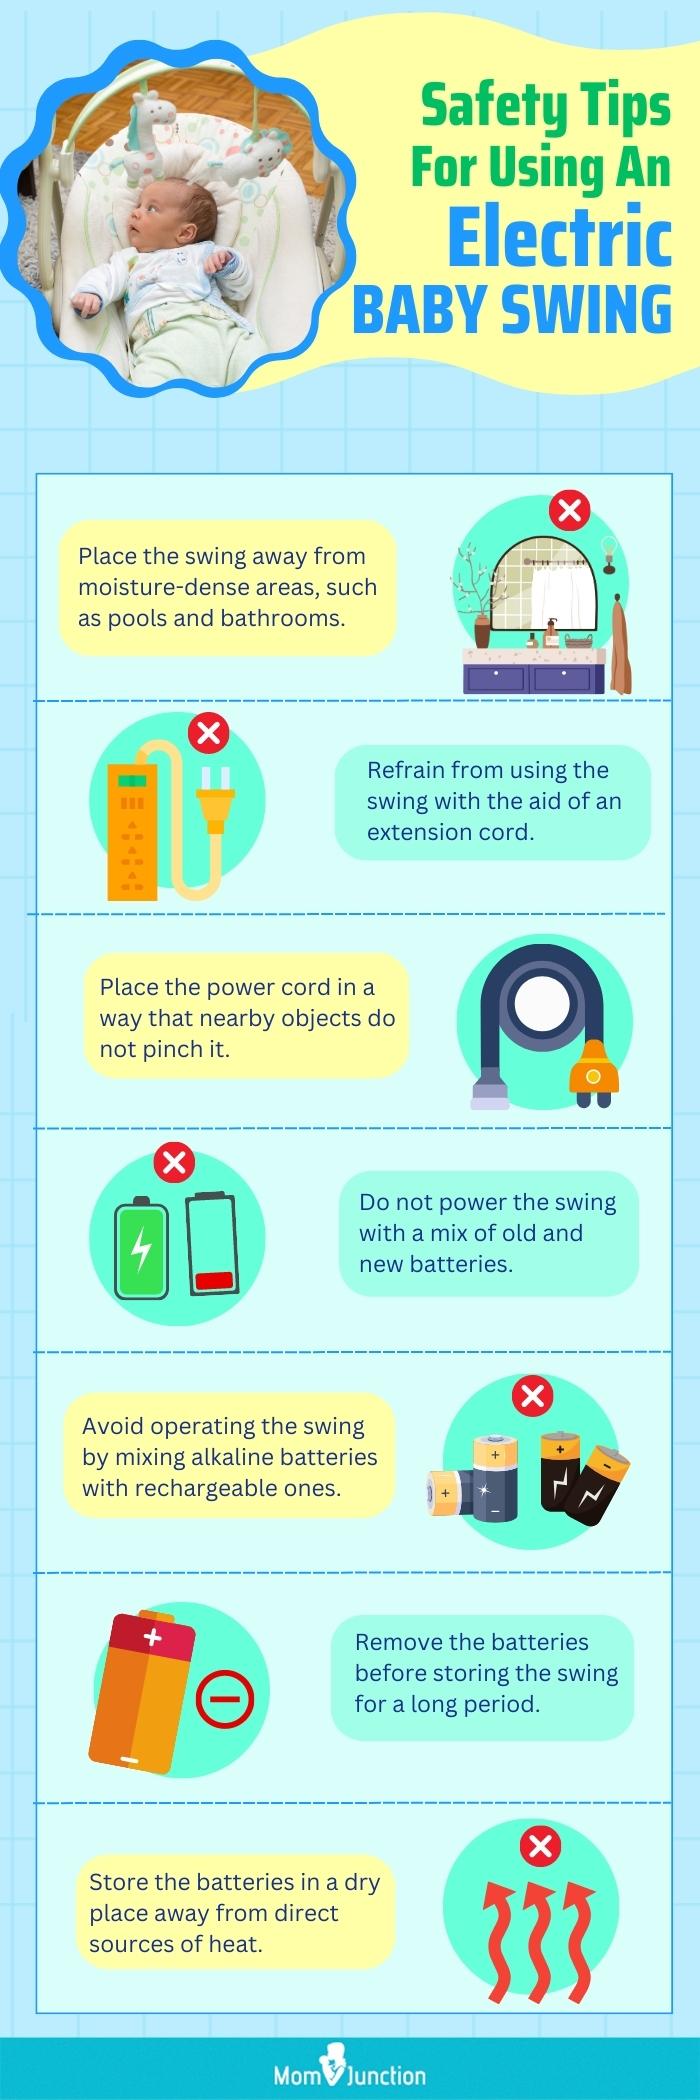 Safety Tips For Using An Electric Baby Swing (infographic)